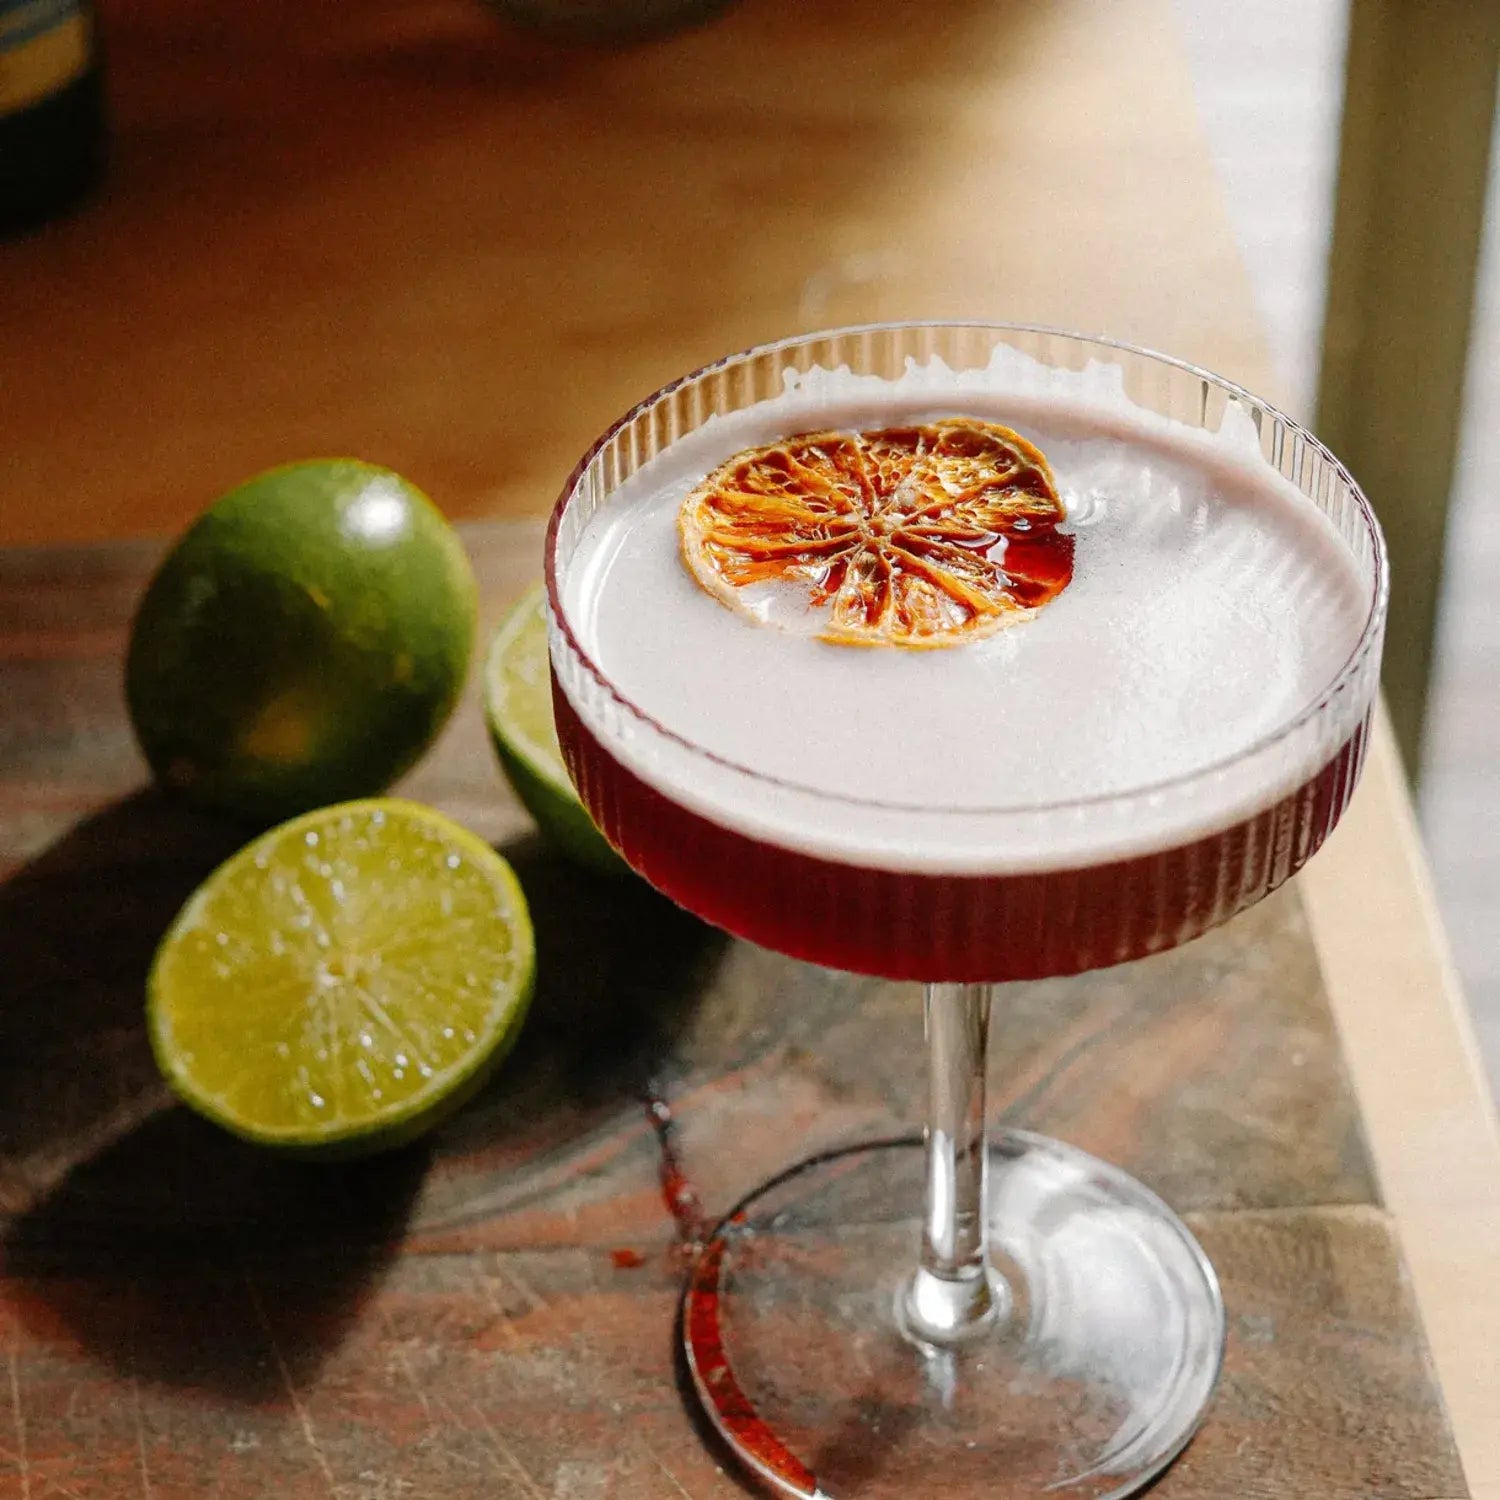 Mr Consistent French Martini  Cocktail Mix